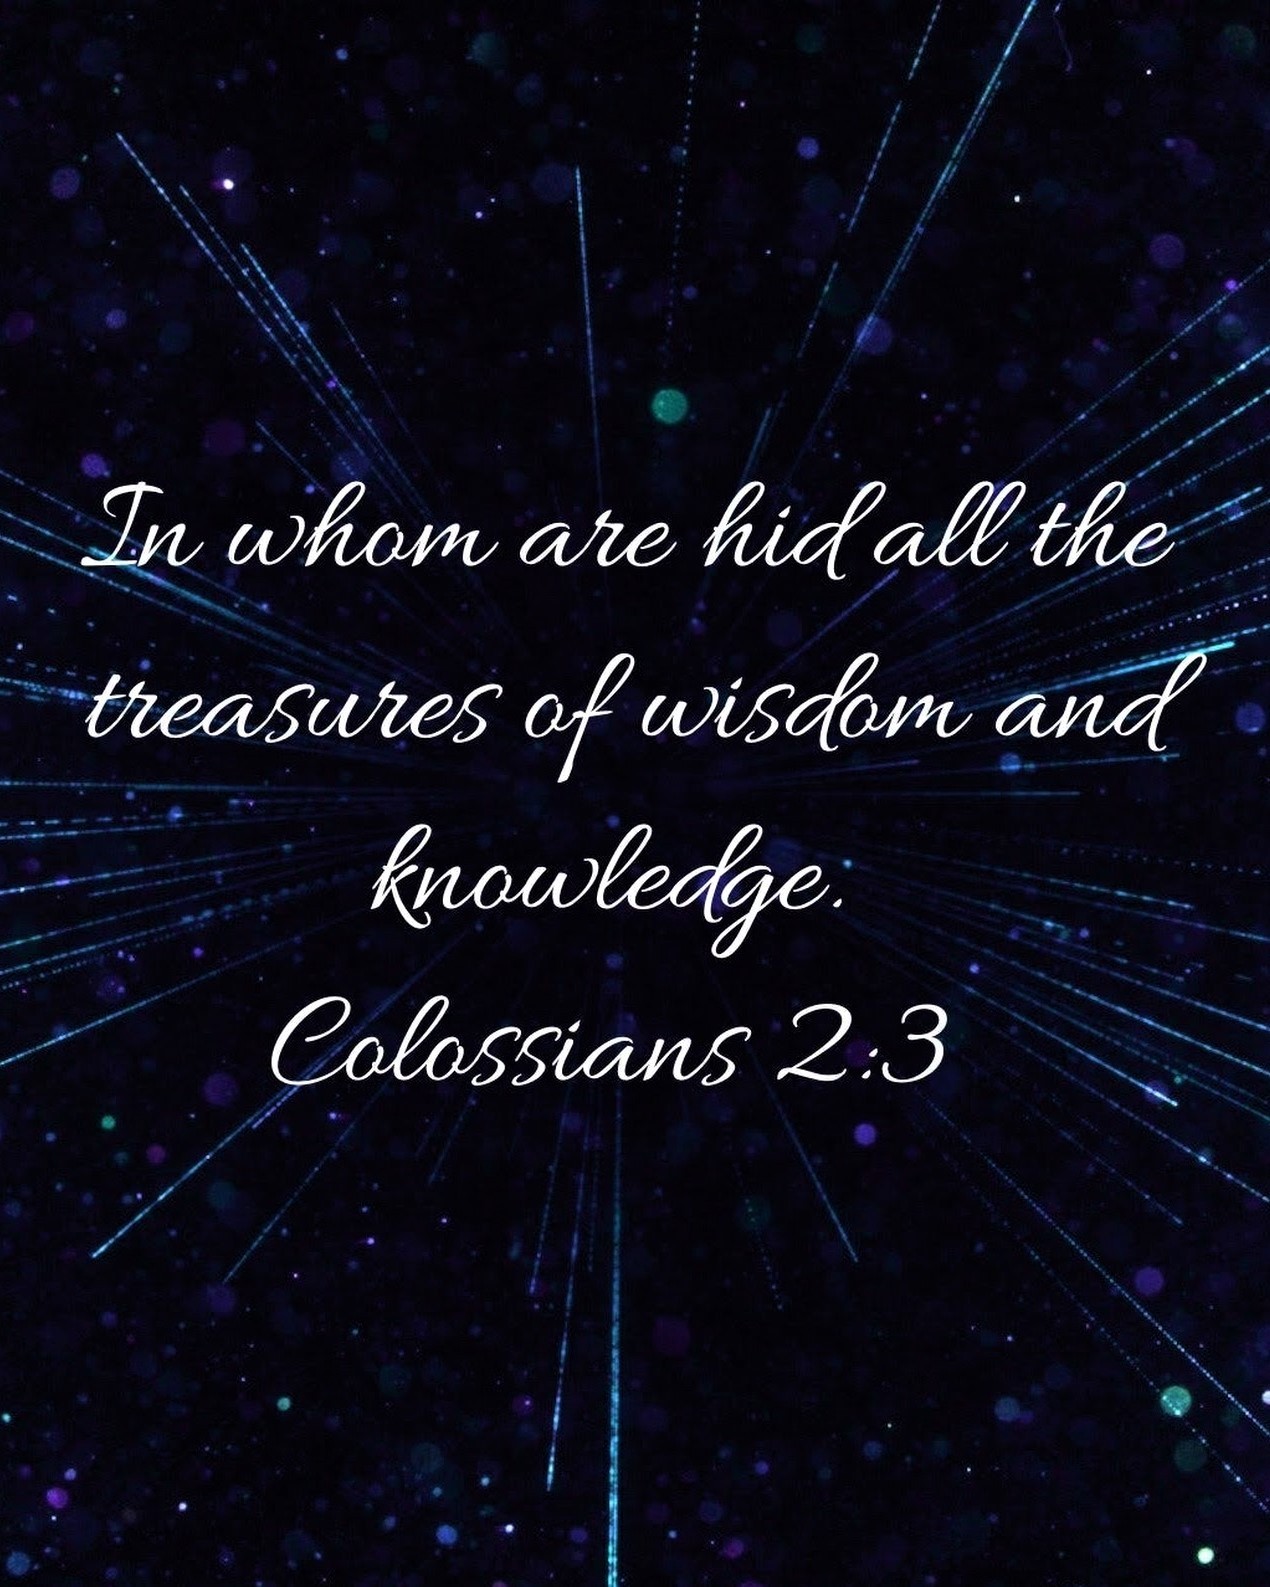 The Living... — Colossians 2:3 (KJV) - In whom are hid all the...